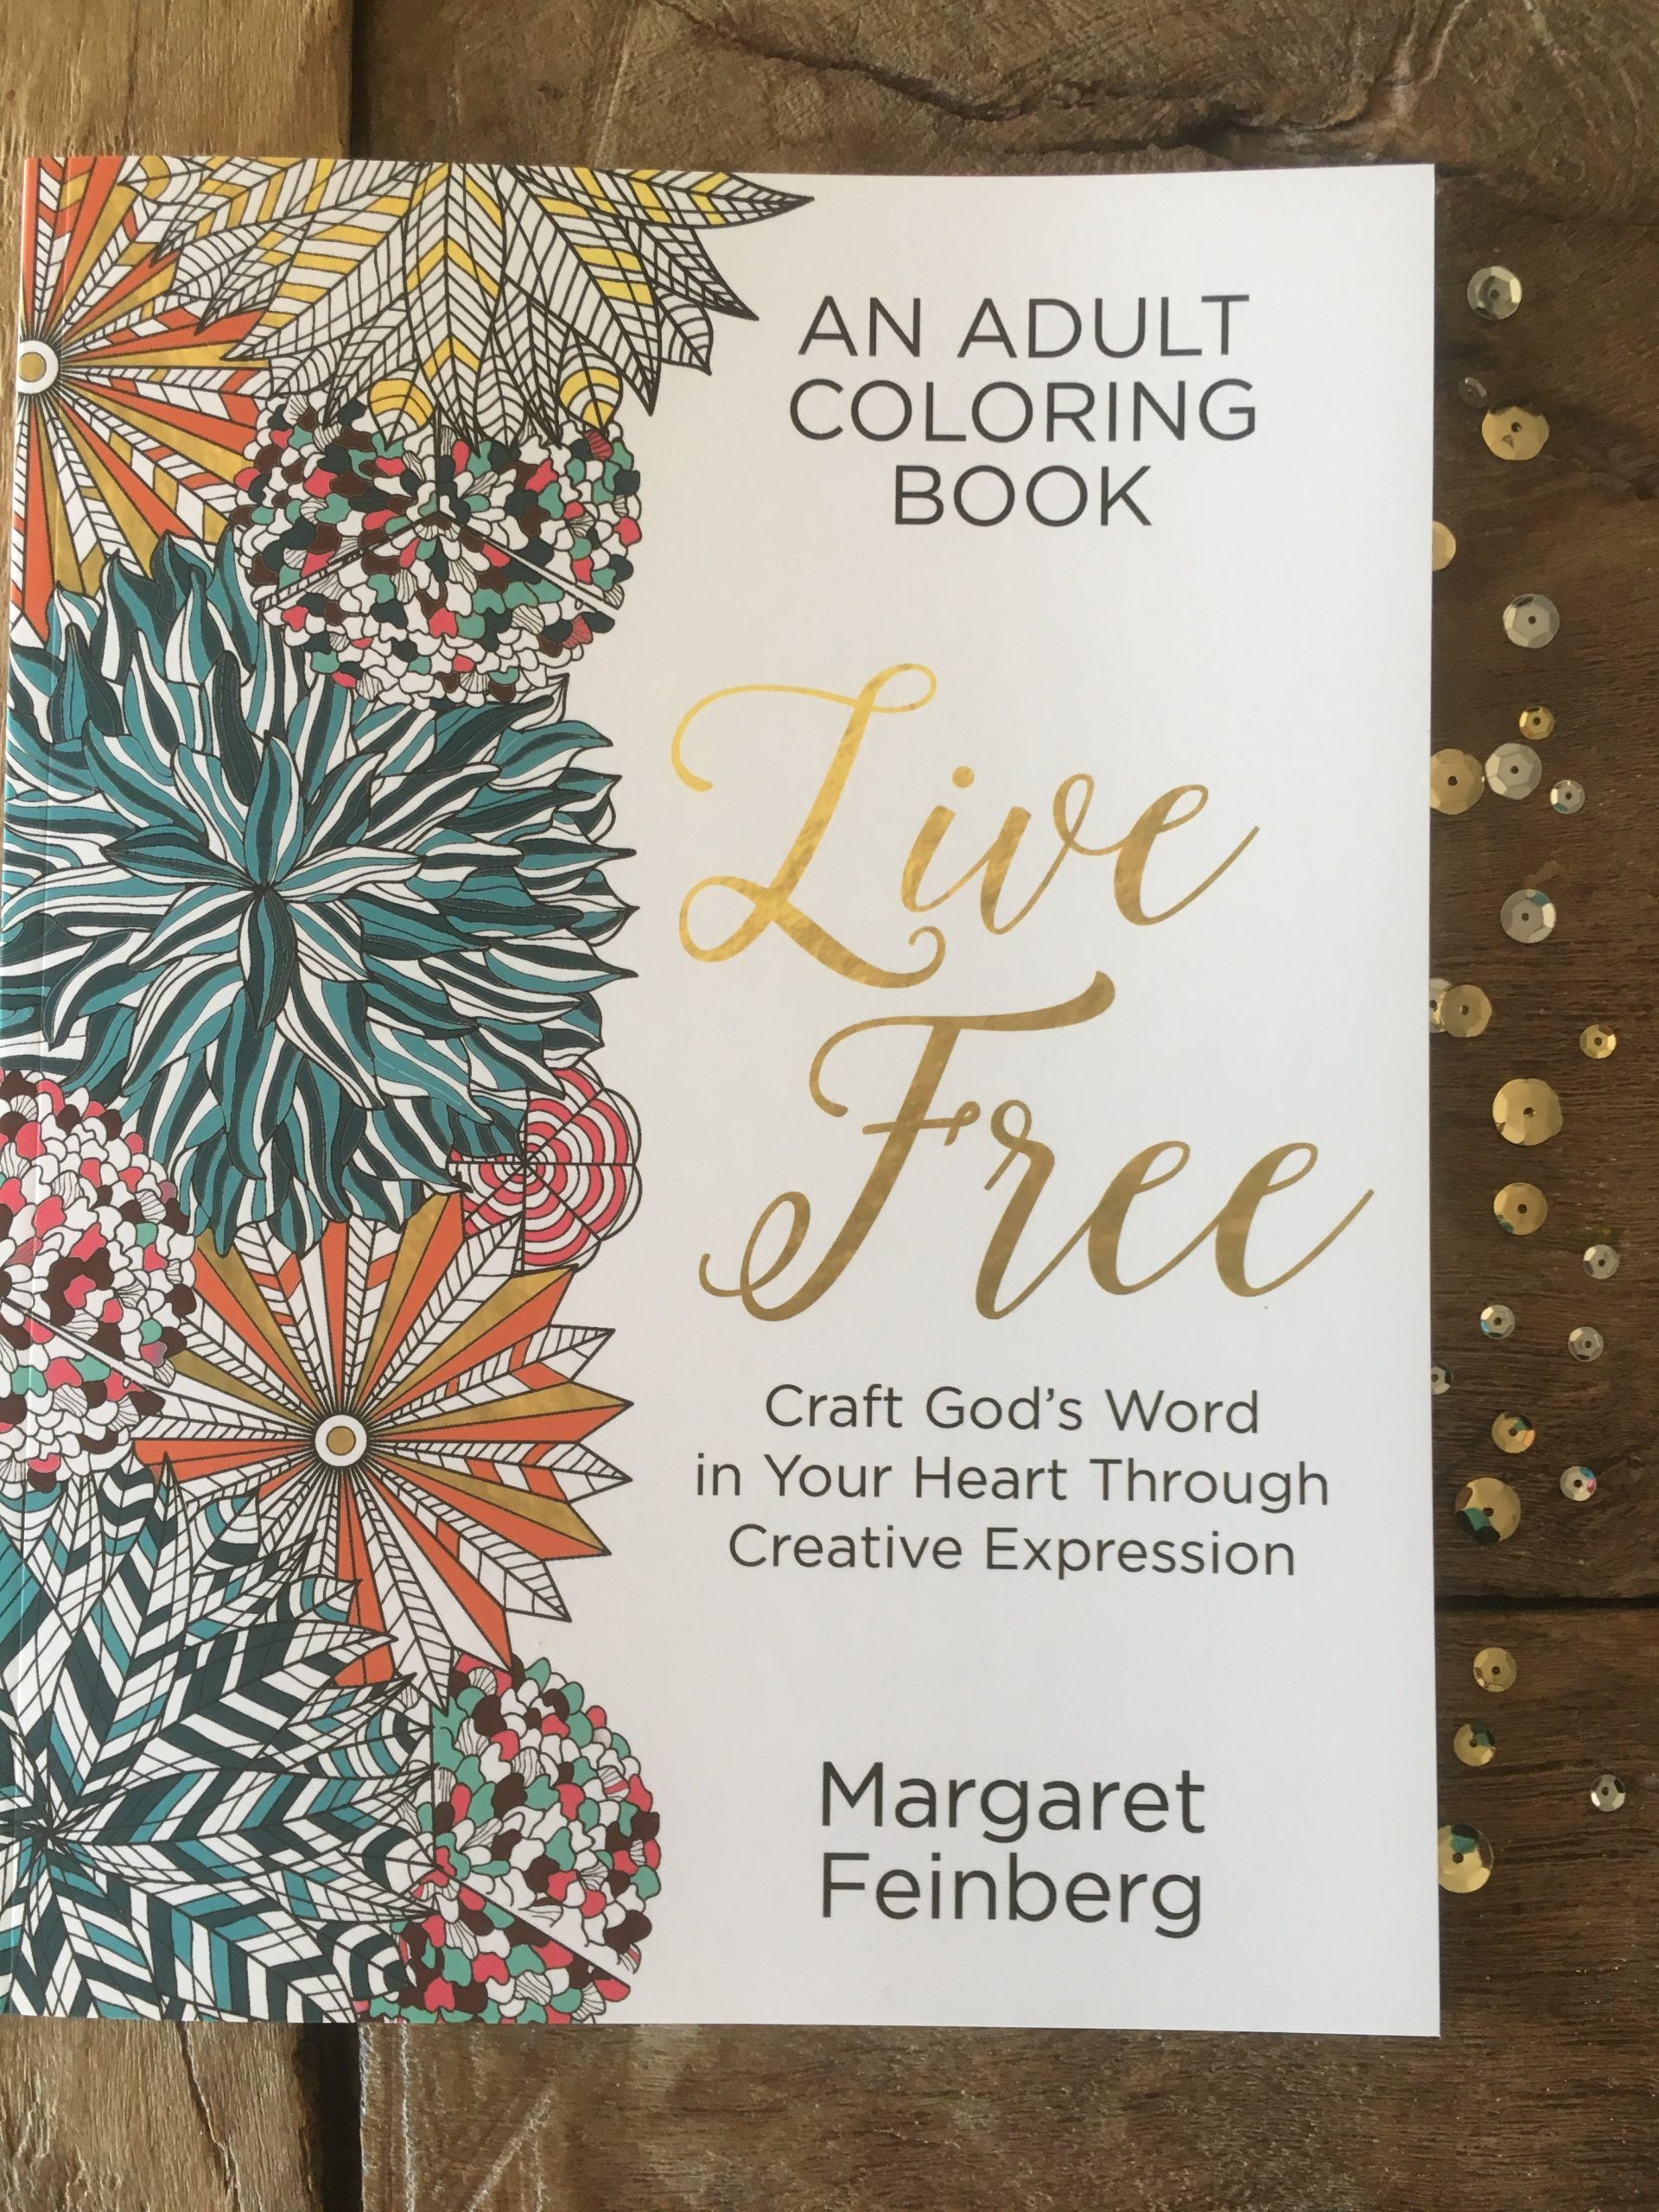 Cheap Adult Coloring Books
 Live Free An Adult Coloring Book – margaretfeinbergstore